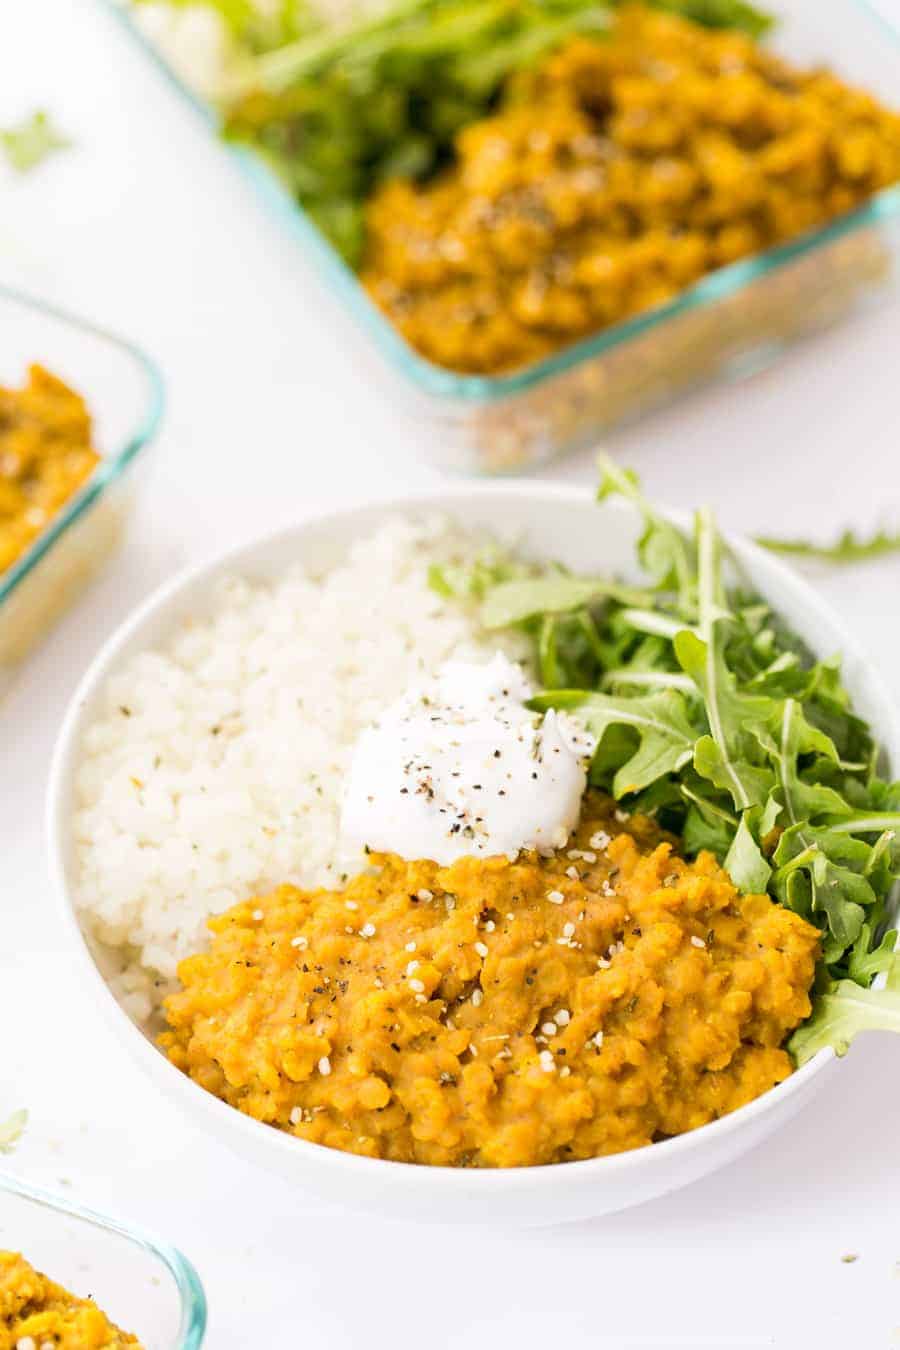 This vegan RED LENTIL DAL is made with just 9 ingredients, in one pot and under 15 minutes!